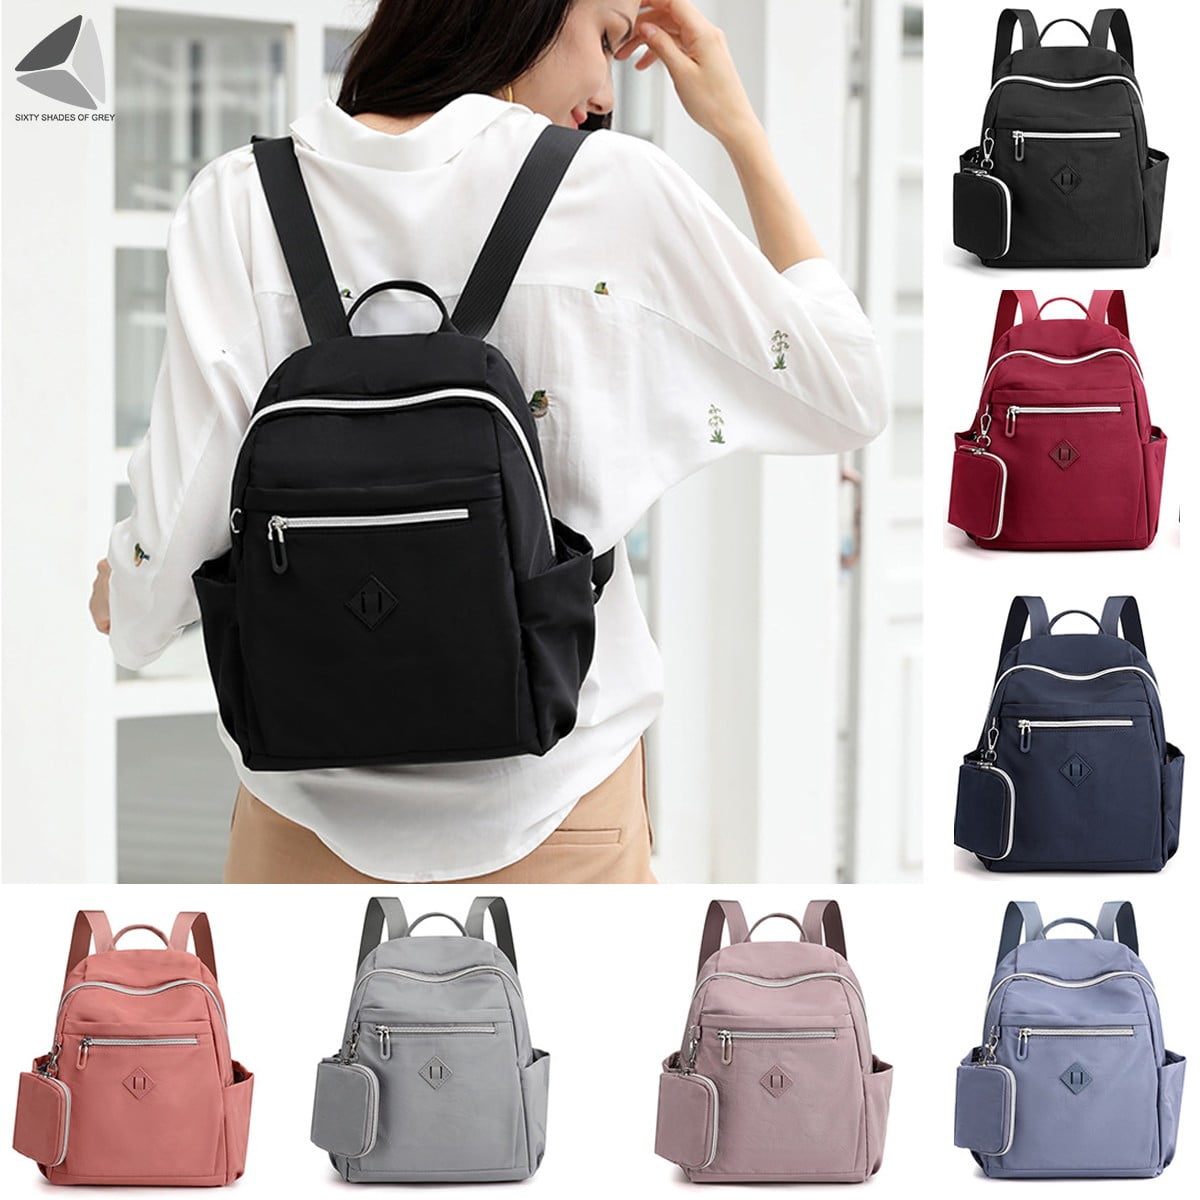 Ambiguity Ladies Backpacks Travel,Backpack Doubles Shoulder Imitation Marble Pattern Female Bag Casual Soft Bread 17x10x18cm 